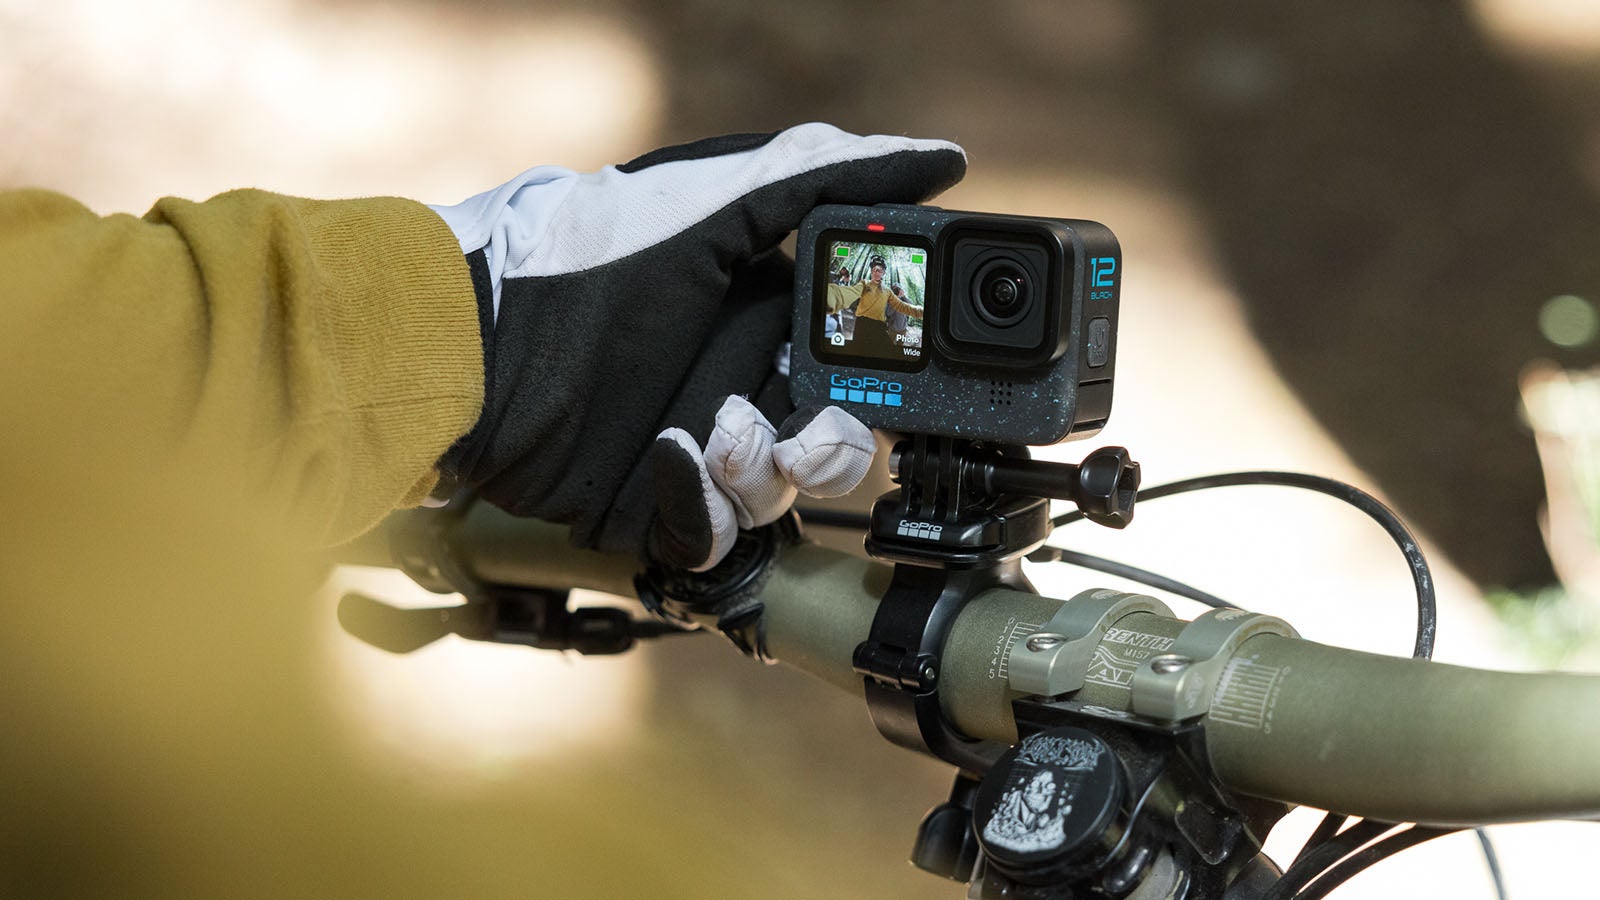 The DJI Osmo Pocket 3 Is Like a Supersized GoPro With an Included Gimbal -  The Messenger